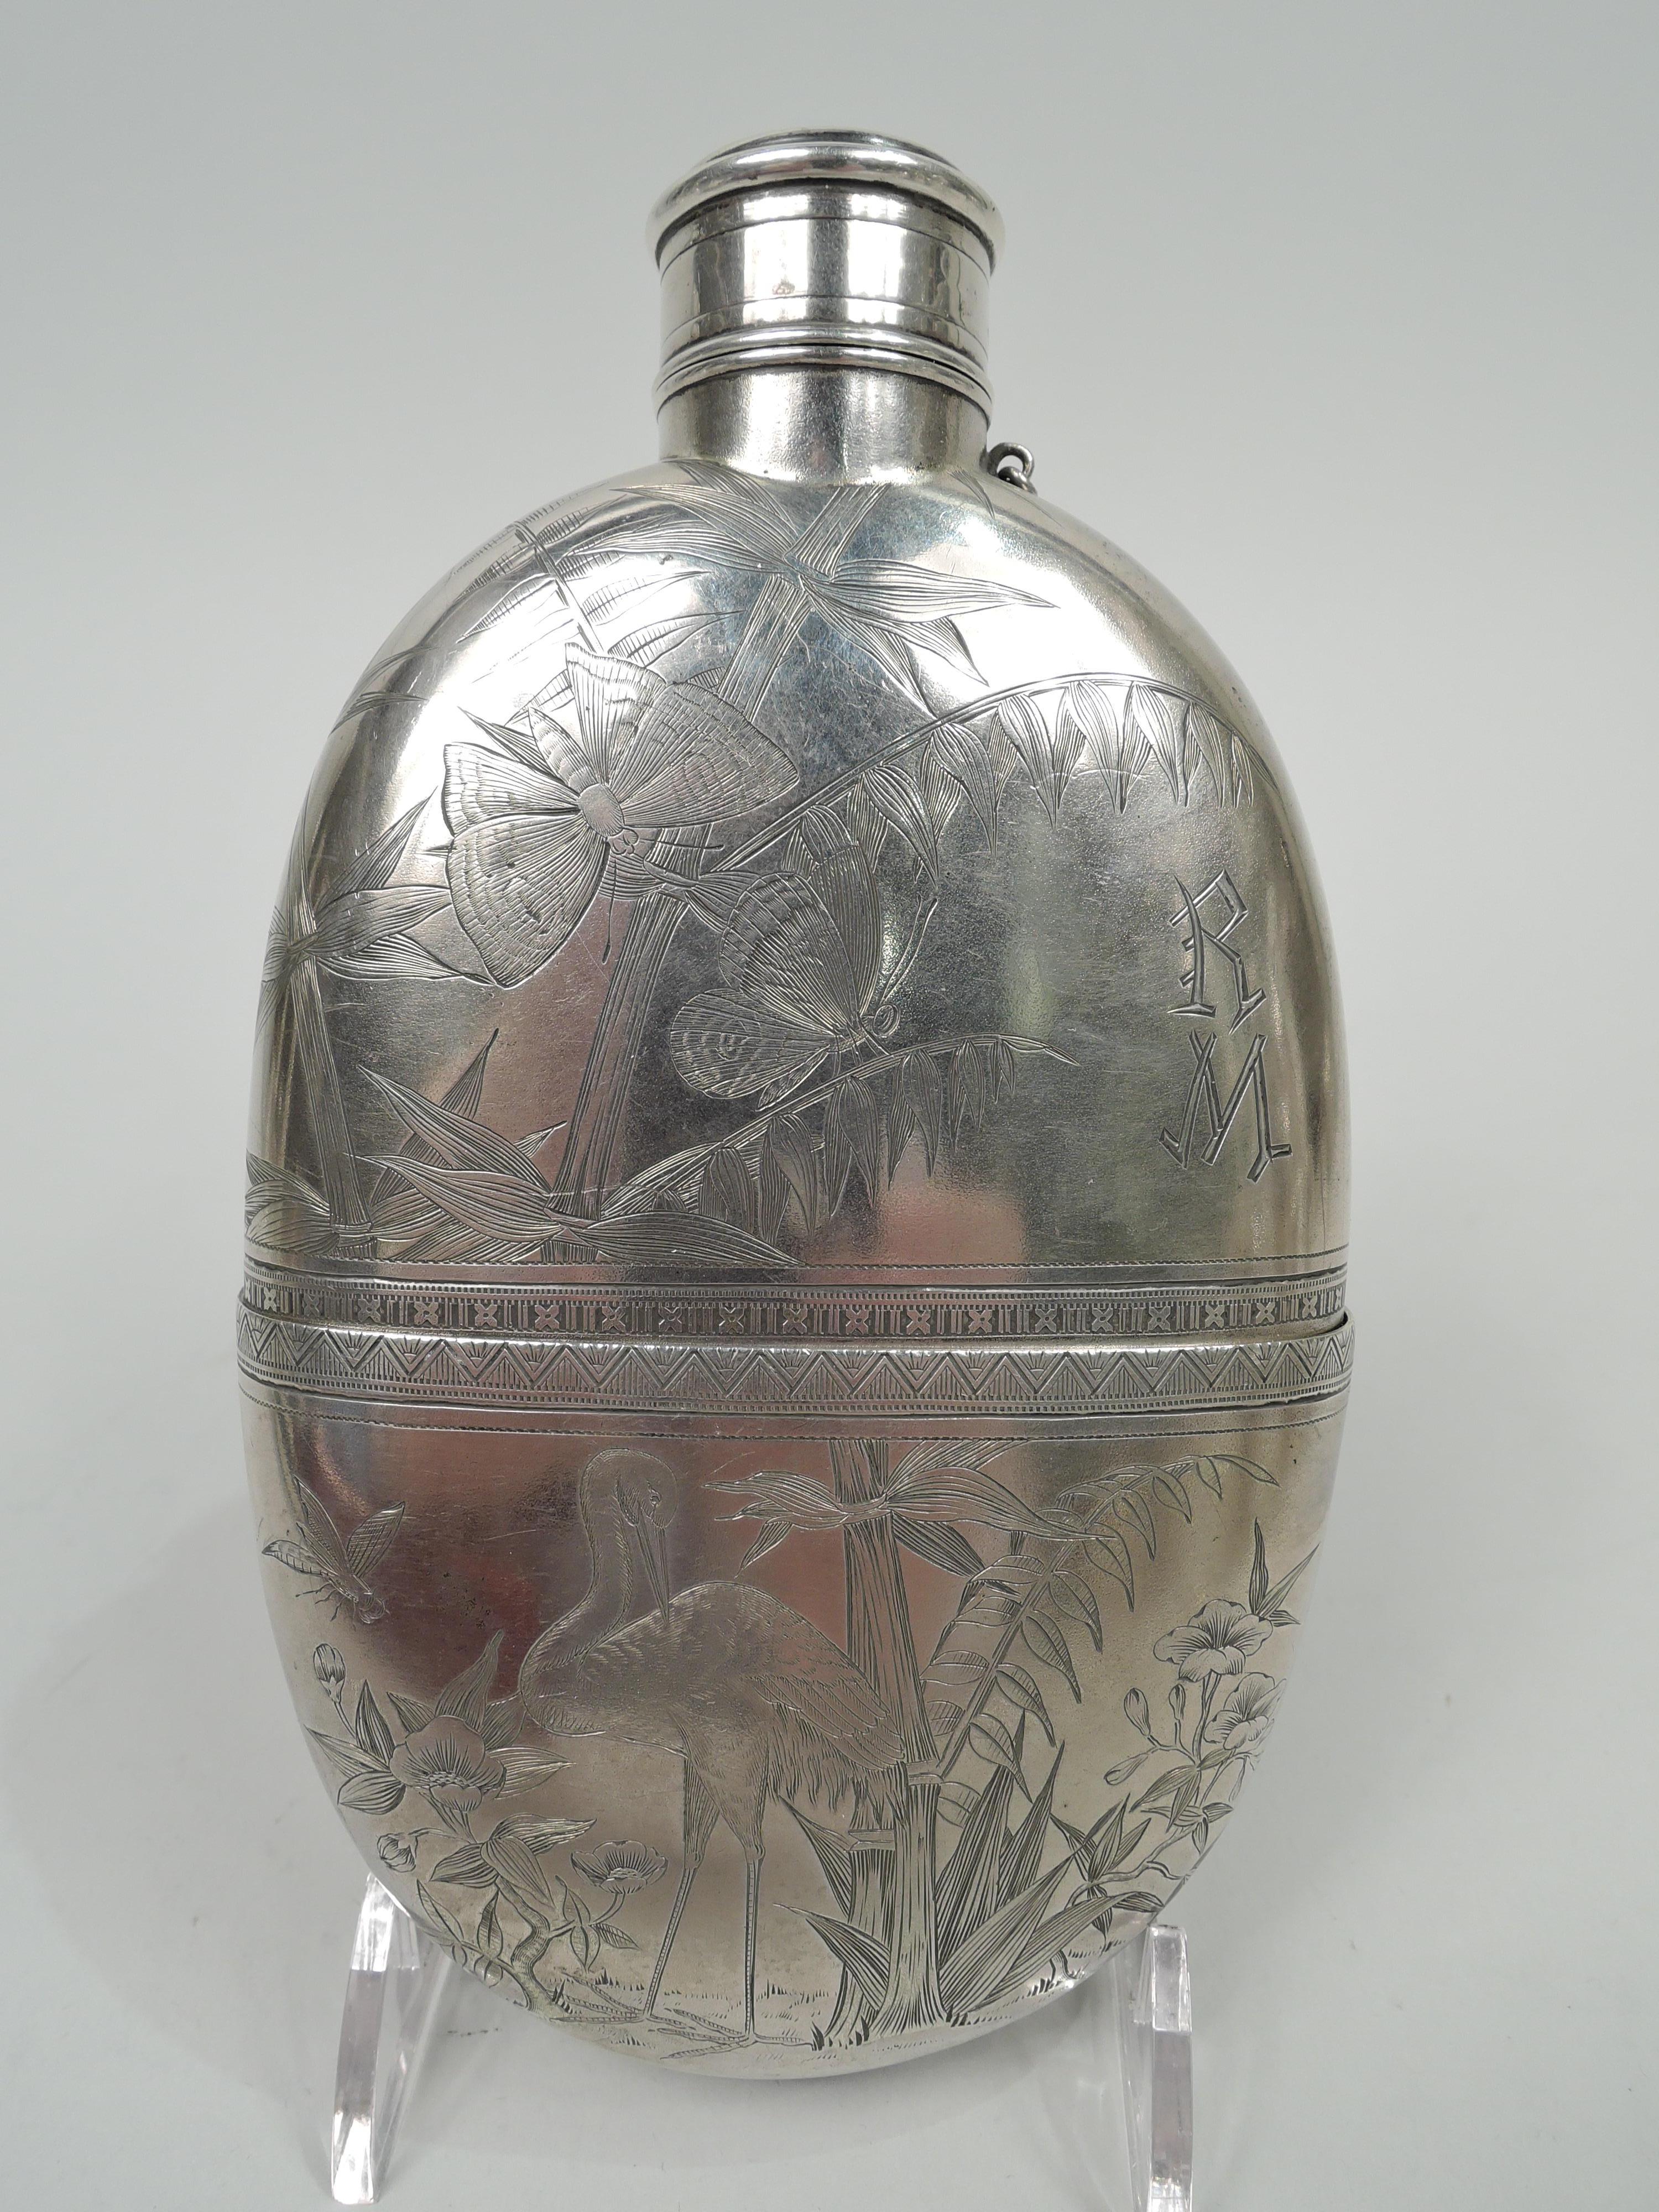 Japonisme Gorgeous Gorham Japonesque Sterling Silver Flask with Cranes & Bamboo For Sale